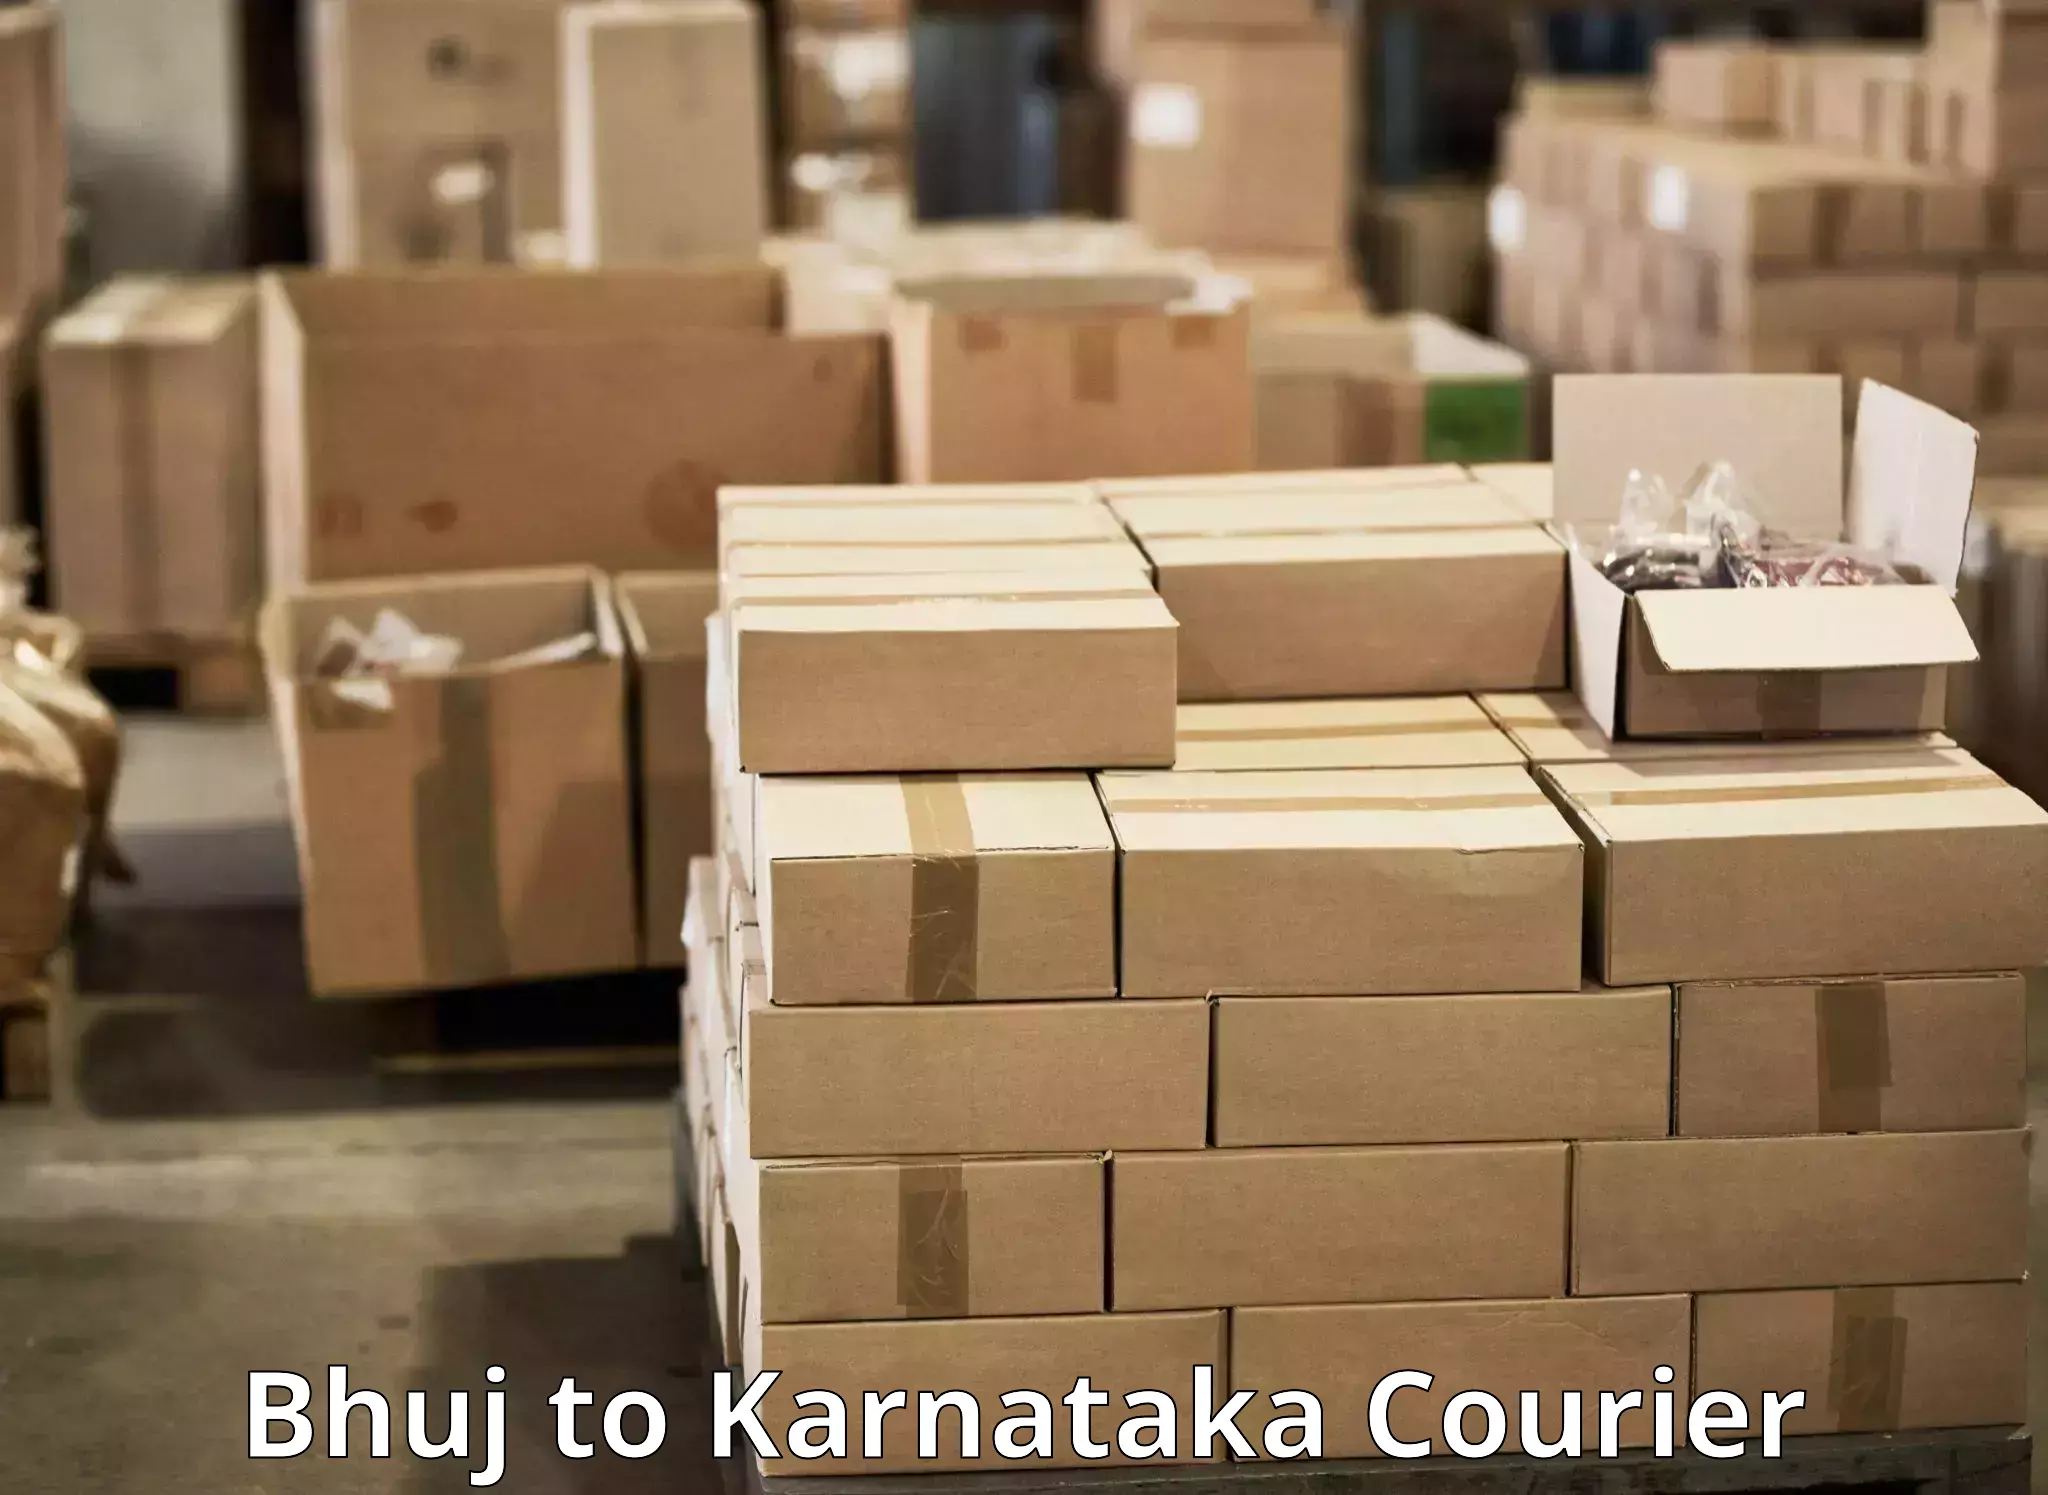 On-call courier service Bhuj to Bagaluru